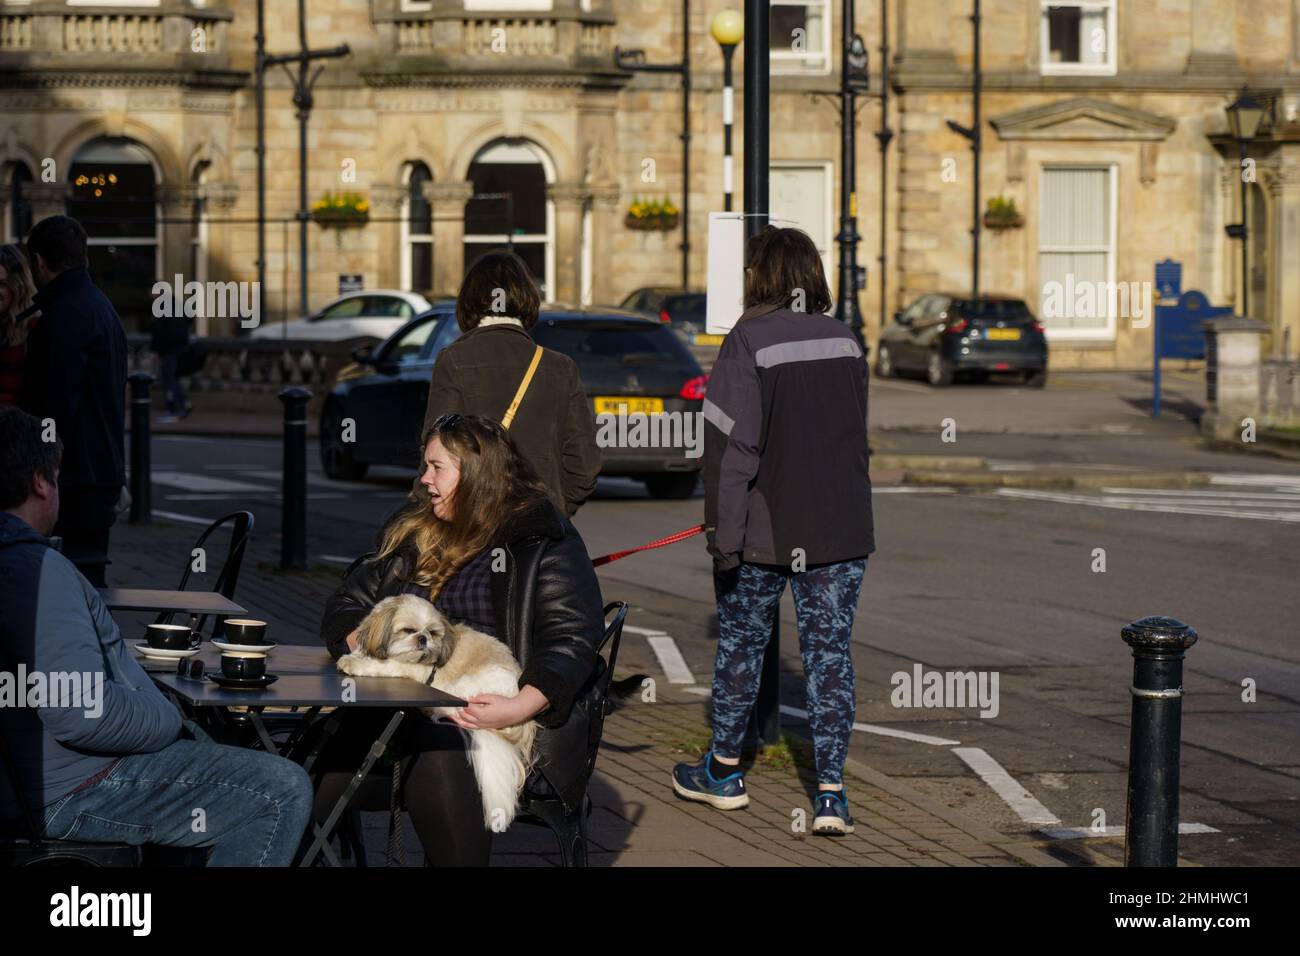 A Harrogate coffee shop's outdoor table had a gorgeous Pekingese dog sitting on it's owner's lap,North Yorkshire, England, UK. Stock Photo